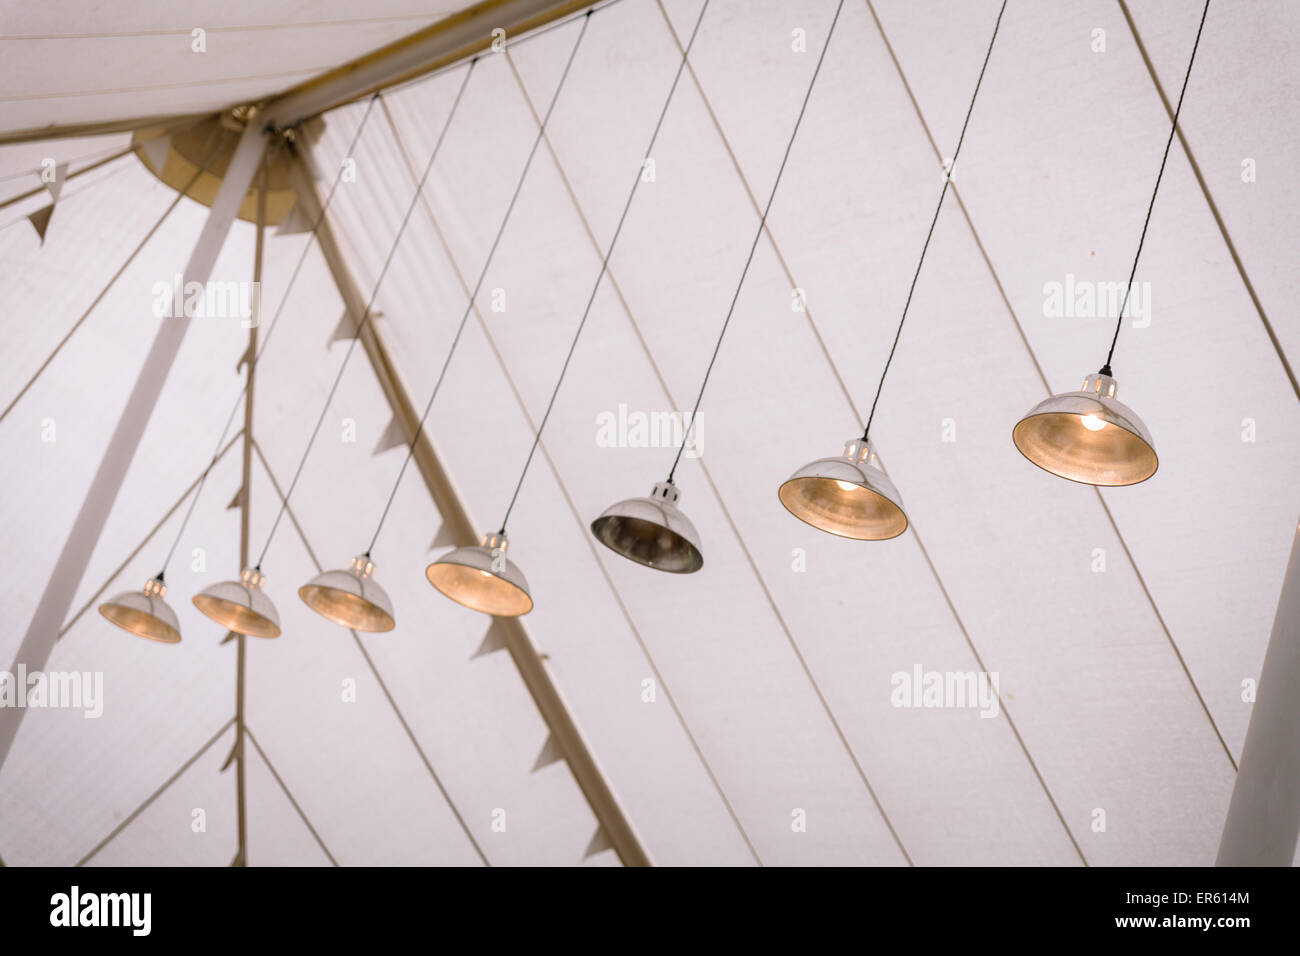 Metal lights hanging from the roof of a white marque.  One light is broken. Stock Photo